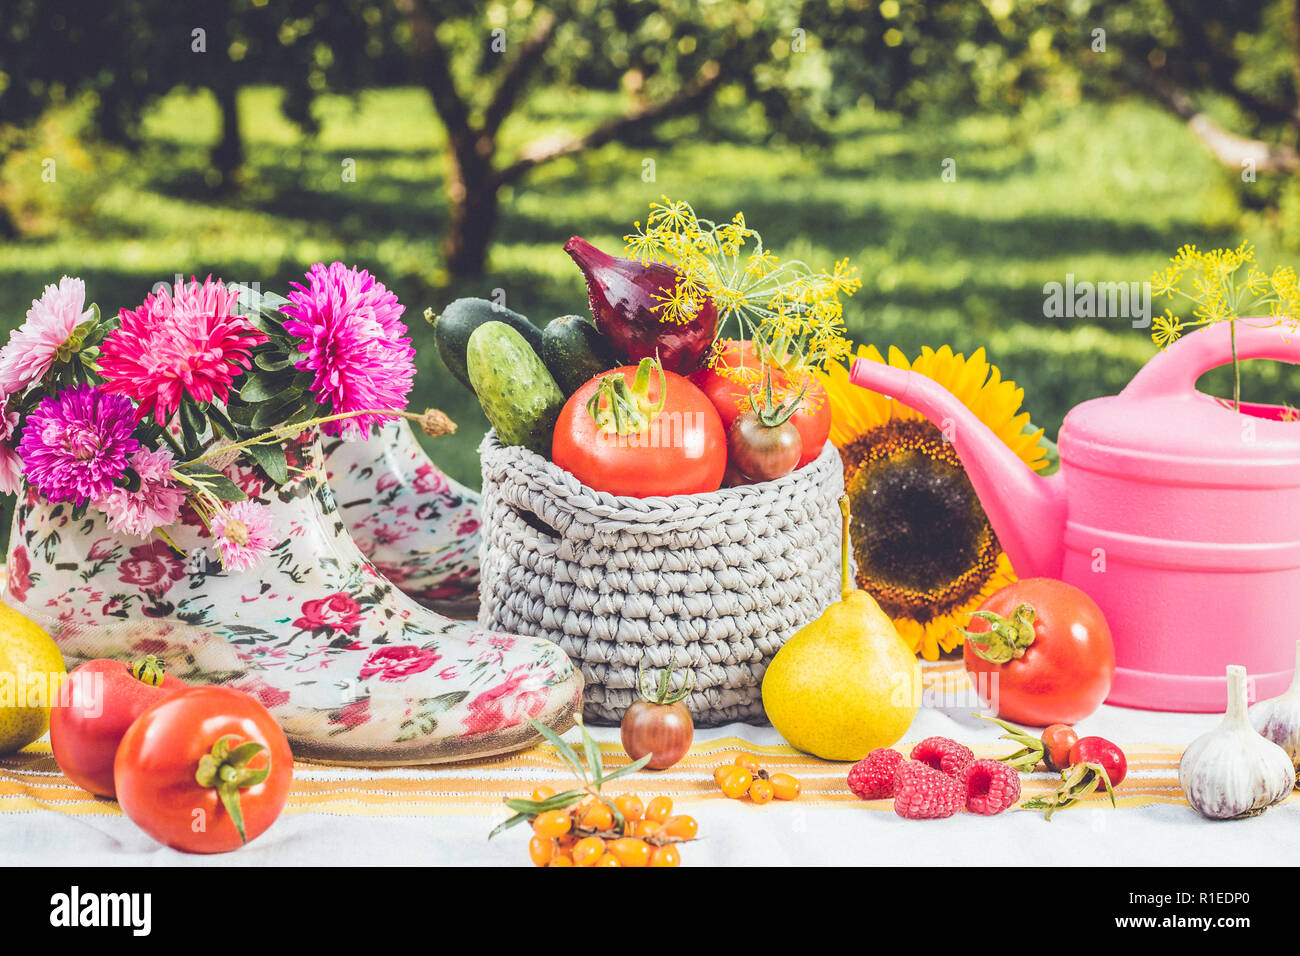 Seasonal gardening set background with various autumn fruits, vegetables gardener tools, pink watering can, white pink floral ankle wellies, outdoors Stock Photo